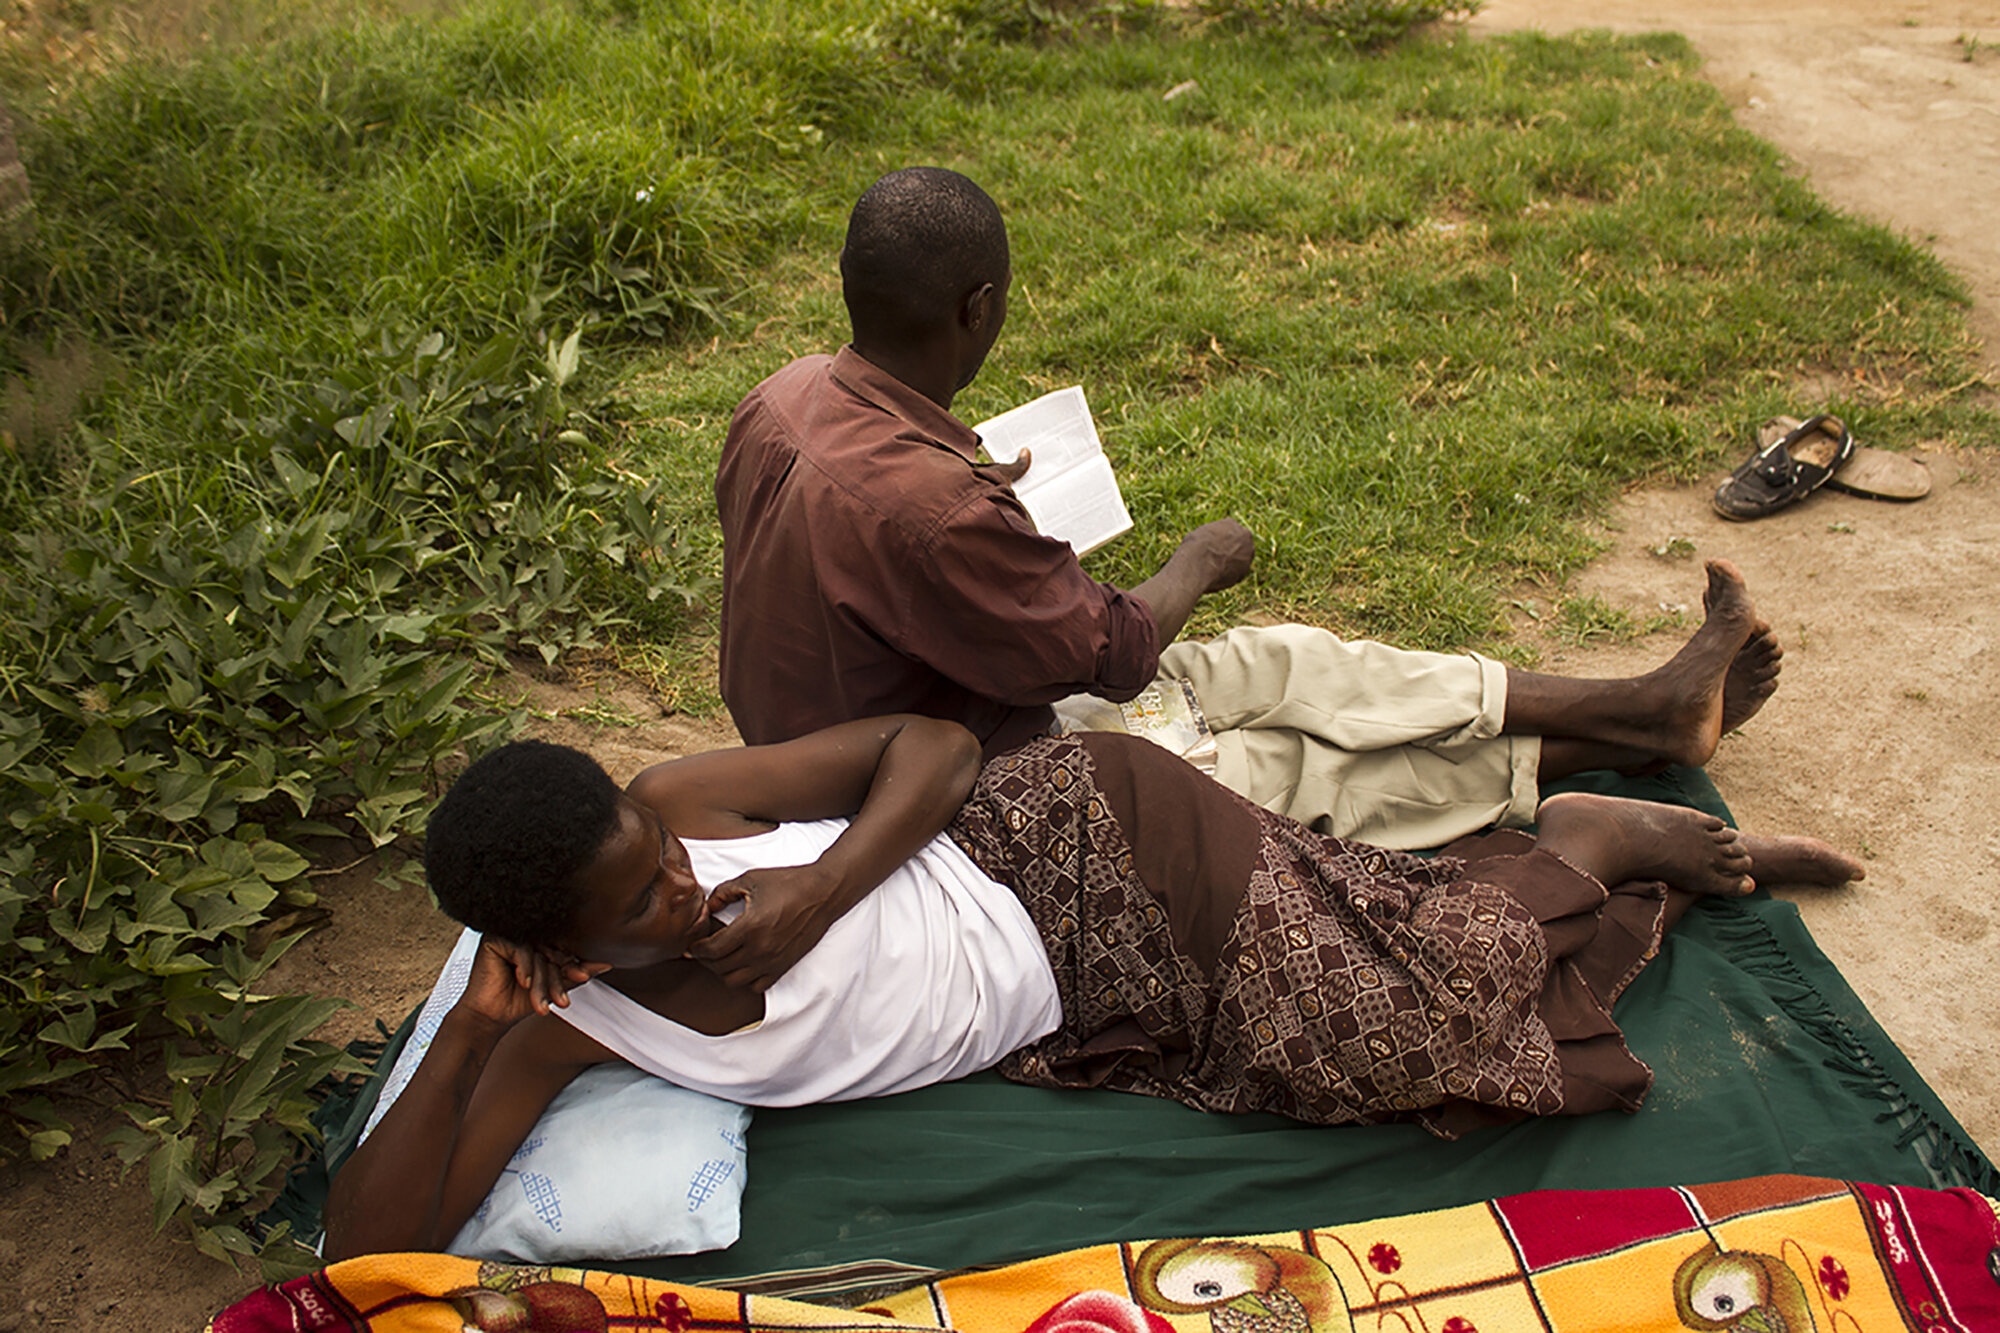  March 28, 2015: Duduzile and Morgan, her partner, relax while reading the Bible at their home on a Sabbath in Hopely Zone 6, Harare. She was raised a Seventh Day Adventist. 